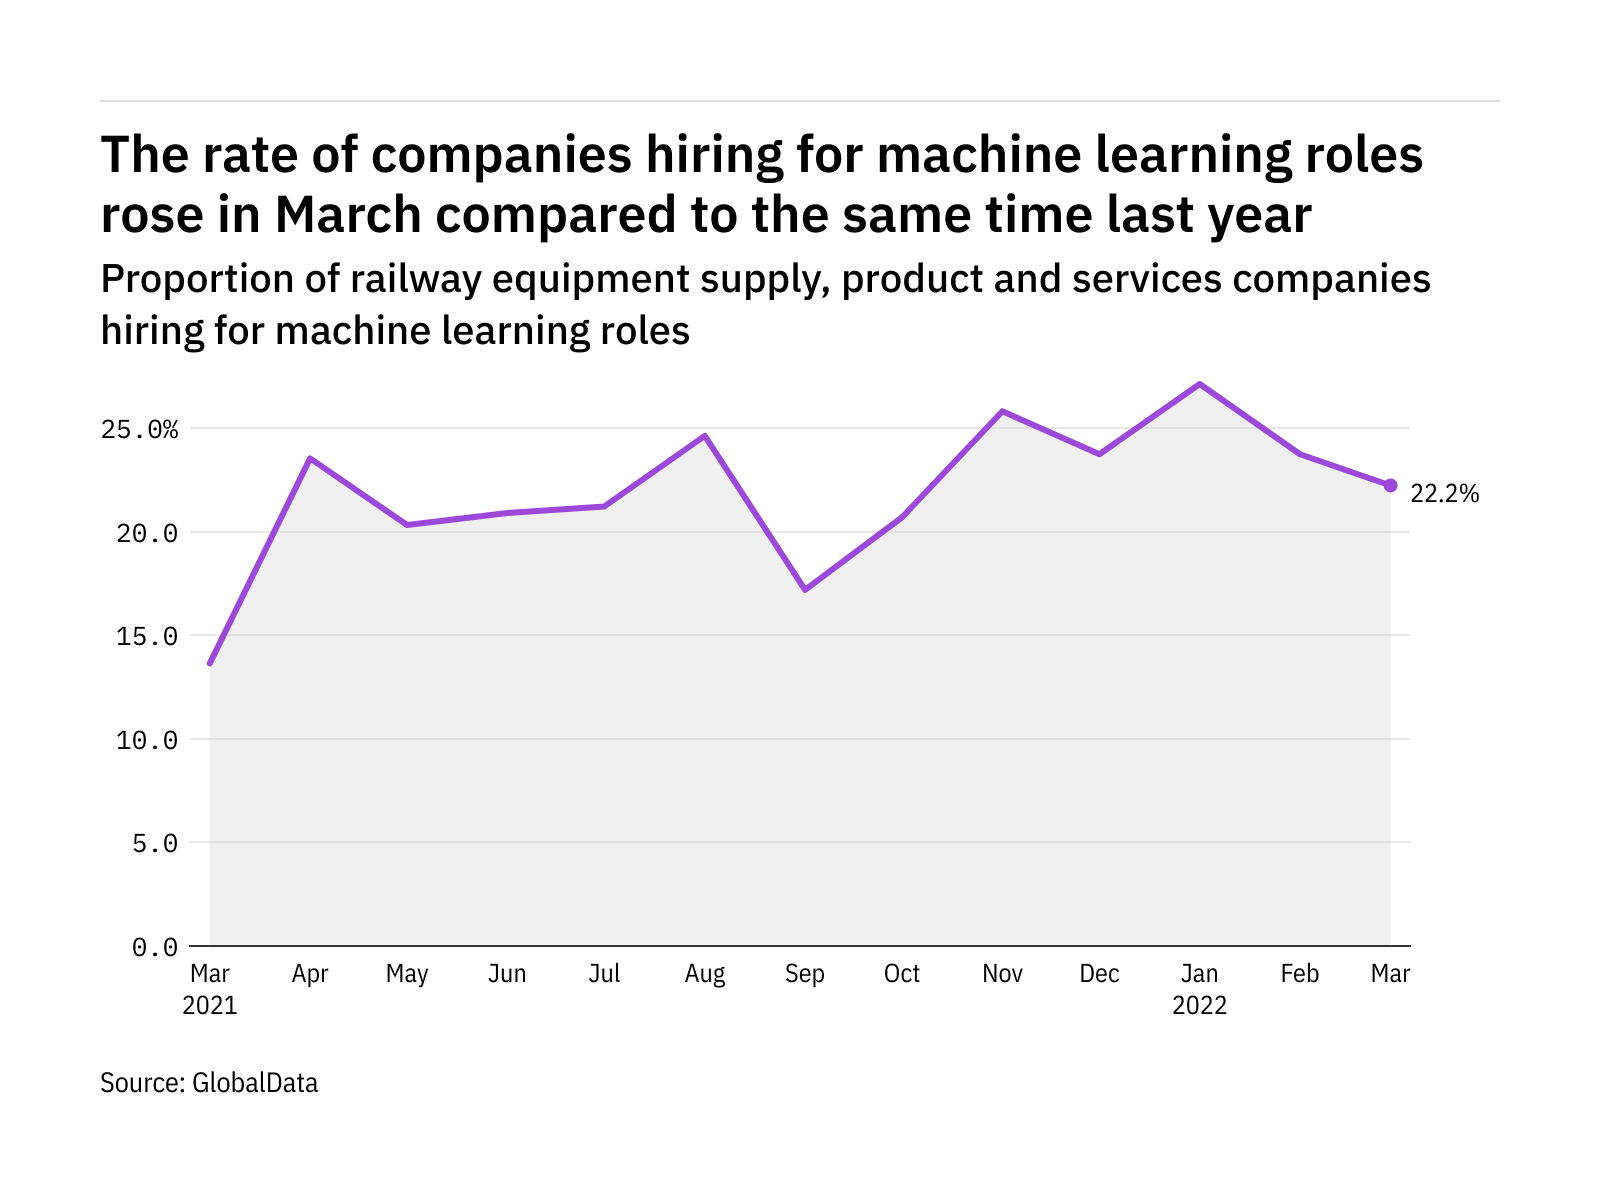 Machine learning hiring levels in the railway industry rose in March 2022